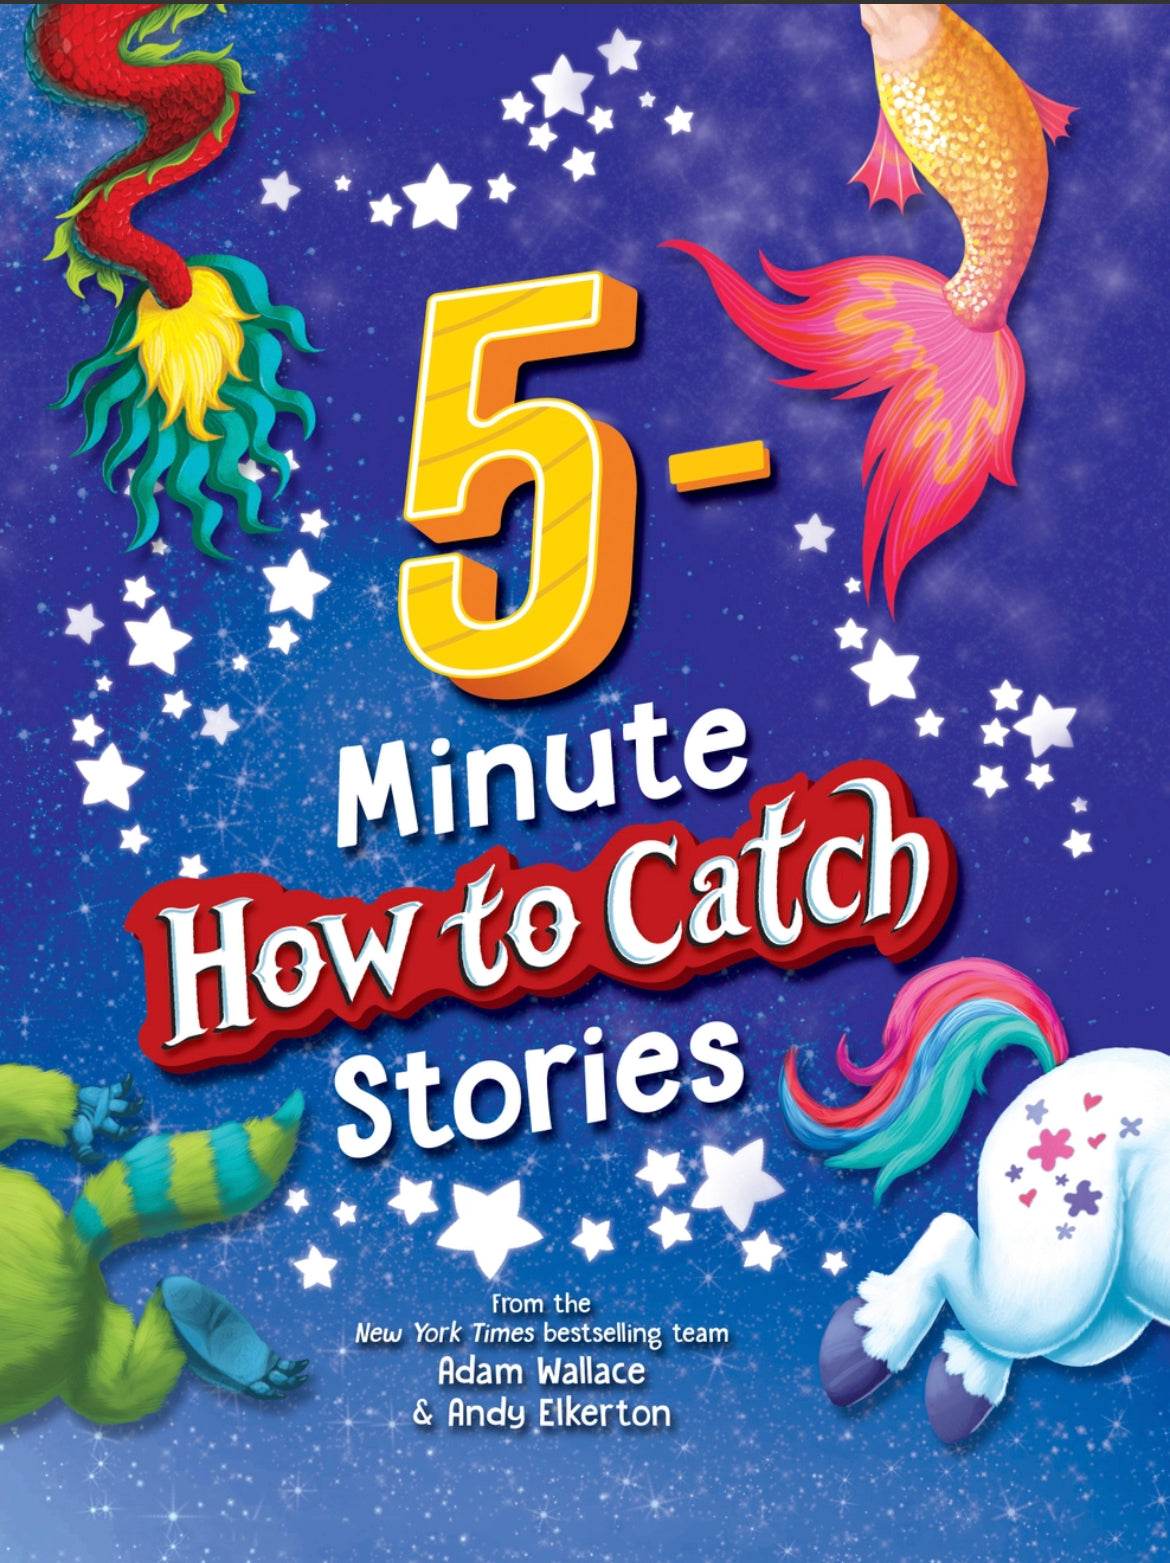 5 Minute How to Catch Stories